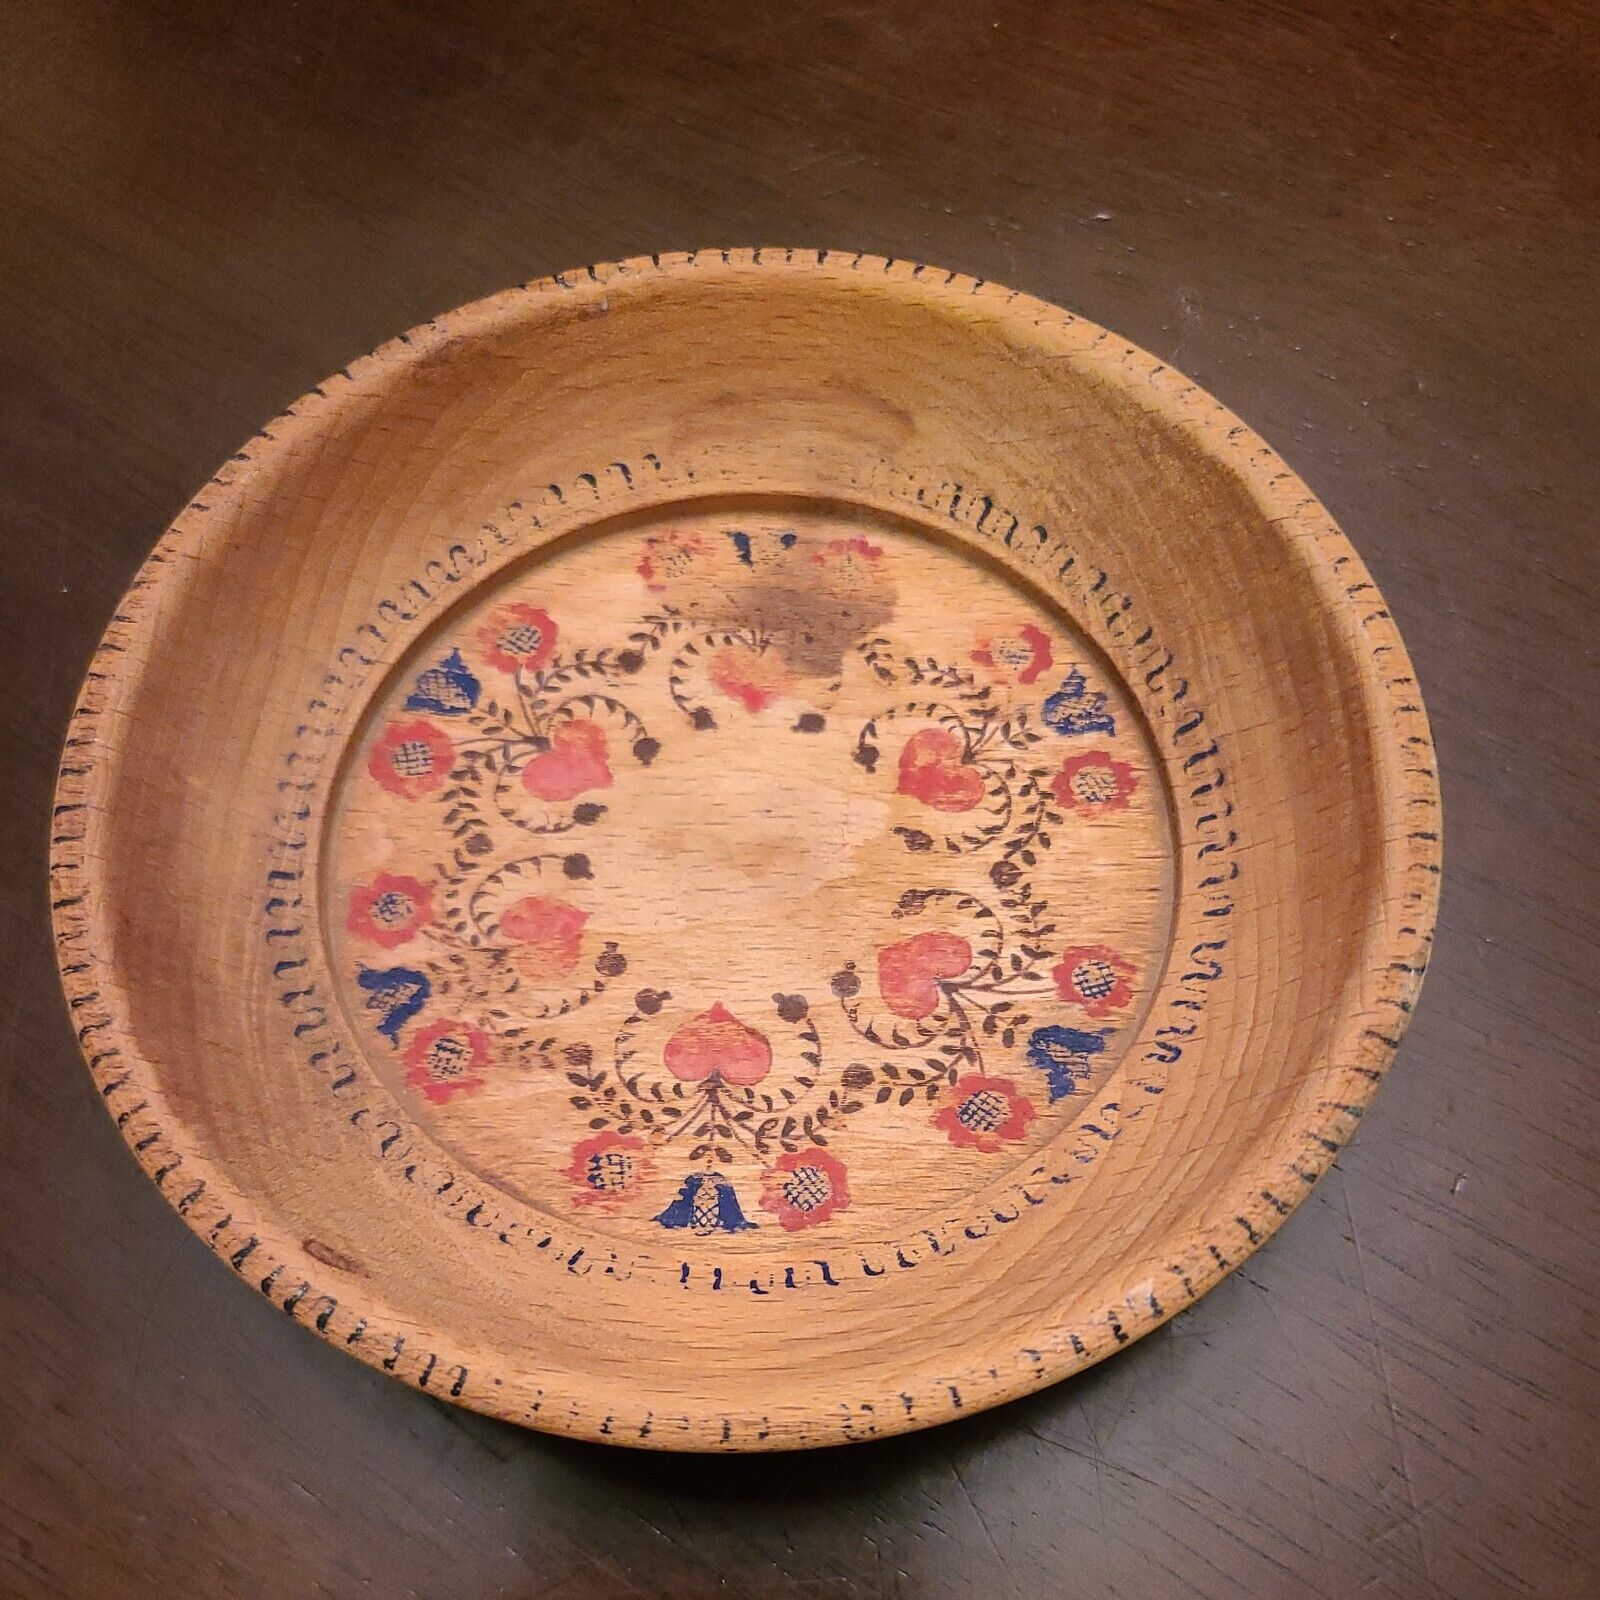 Handpainted 1945 CHM Germany Small Wooden Bowl, Cool Find, Some Marks, Over 75